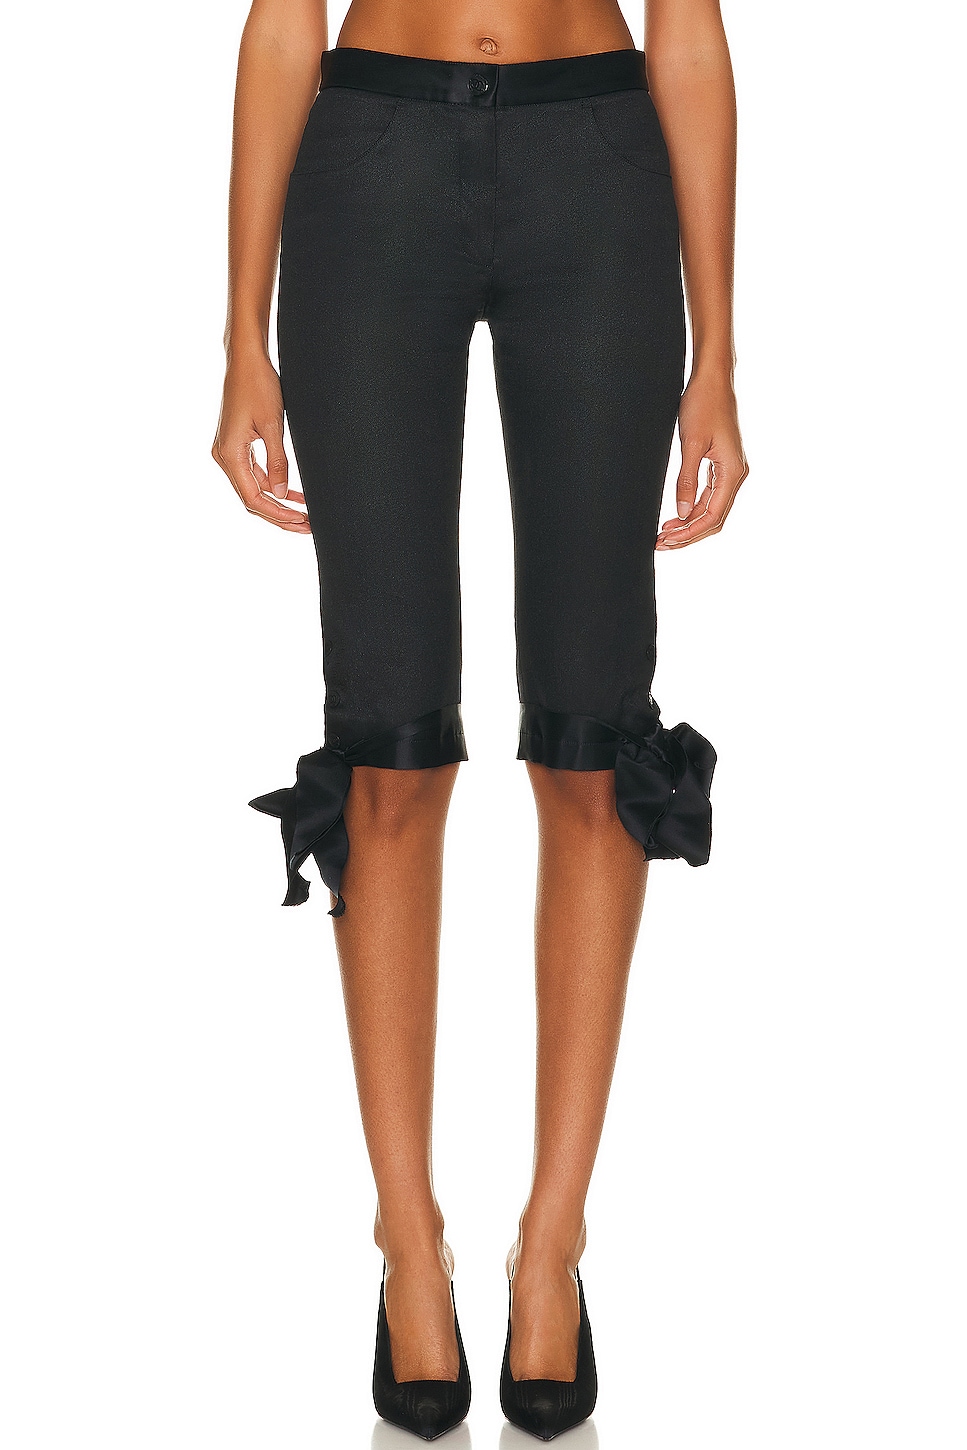 Image 1 of FWRD Renew Chanel Coco Button Bow Pant in Black